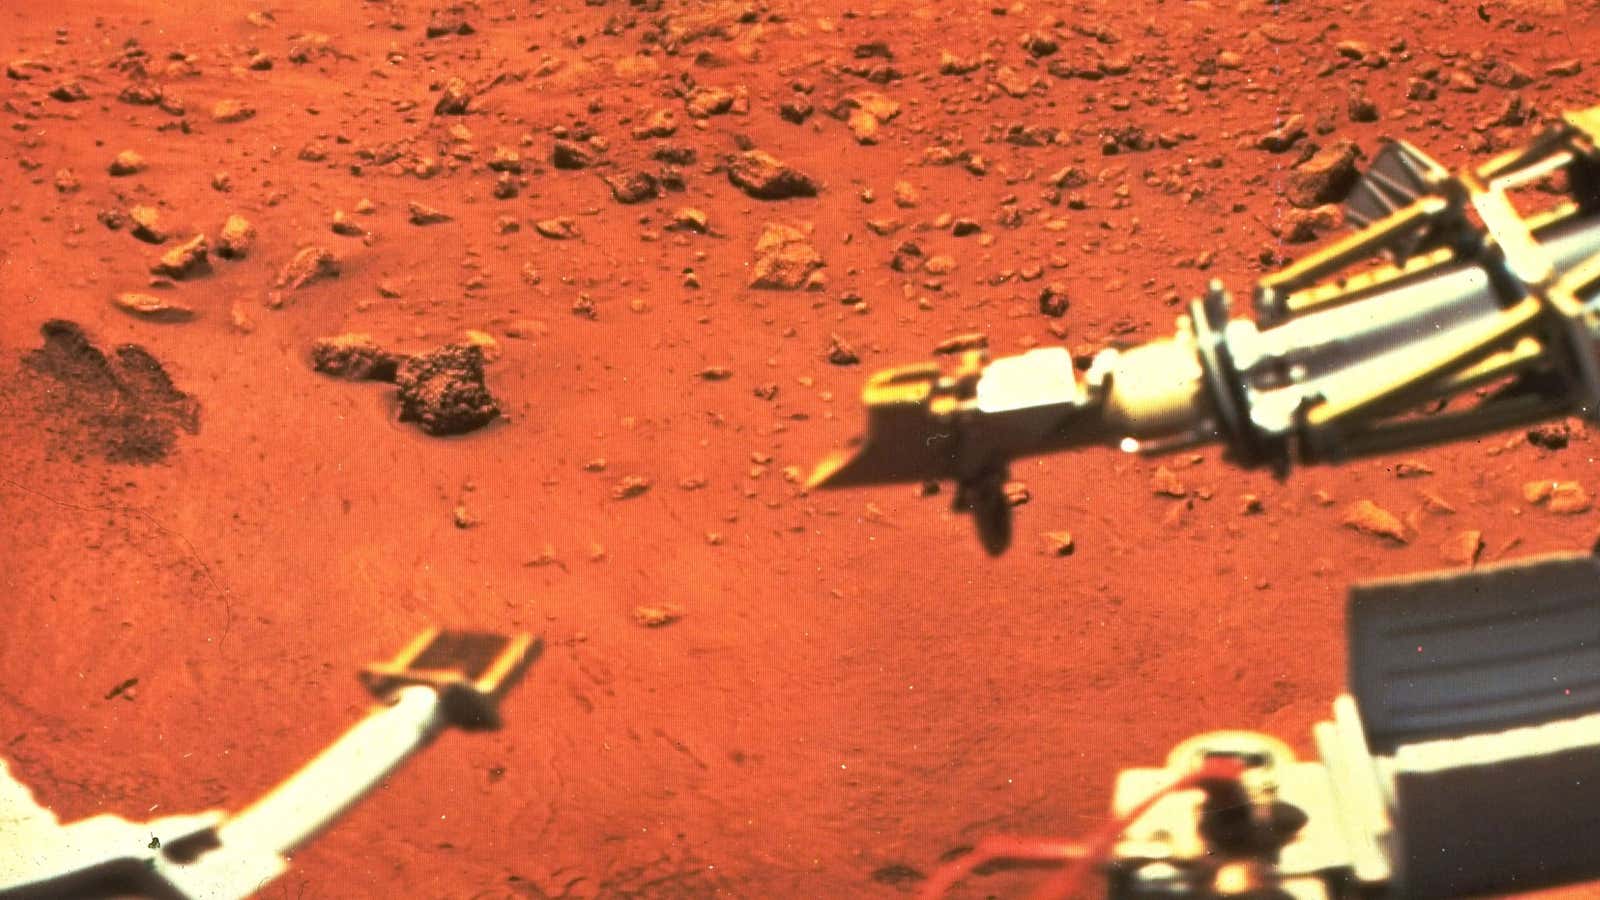 The first color photograph taken on the surface of Mars, by the Viking I lander on July 21, 1976.